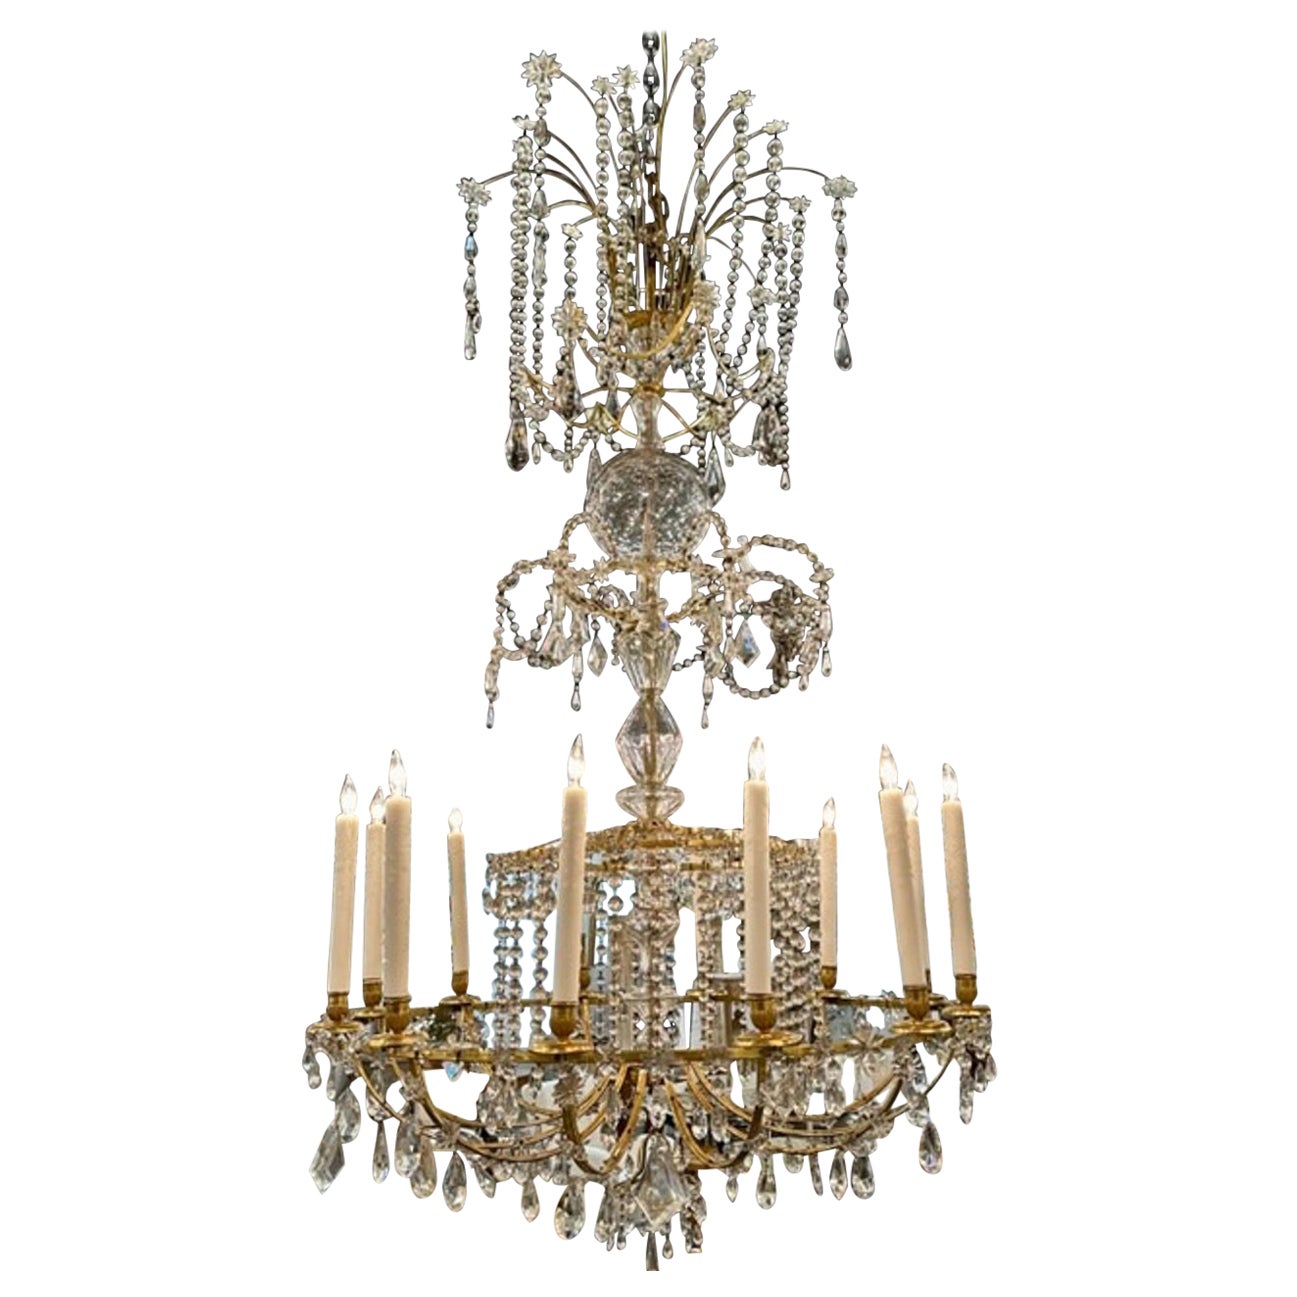 Large Scale 19th Century Russian Gilt Bronze Chandelier